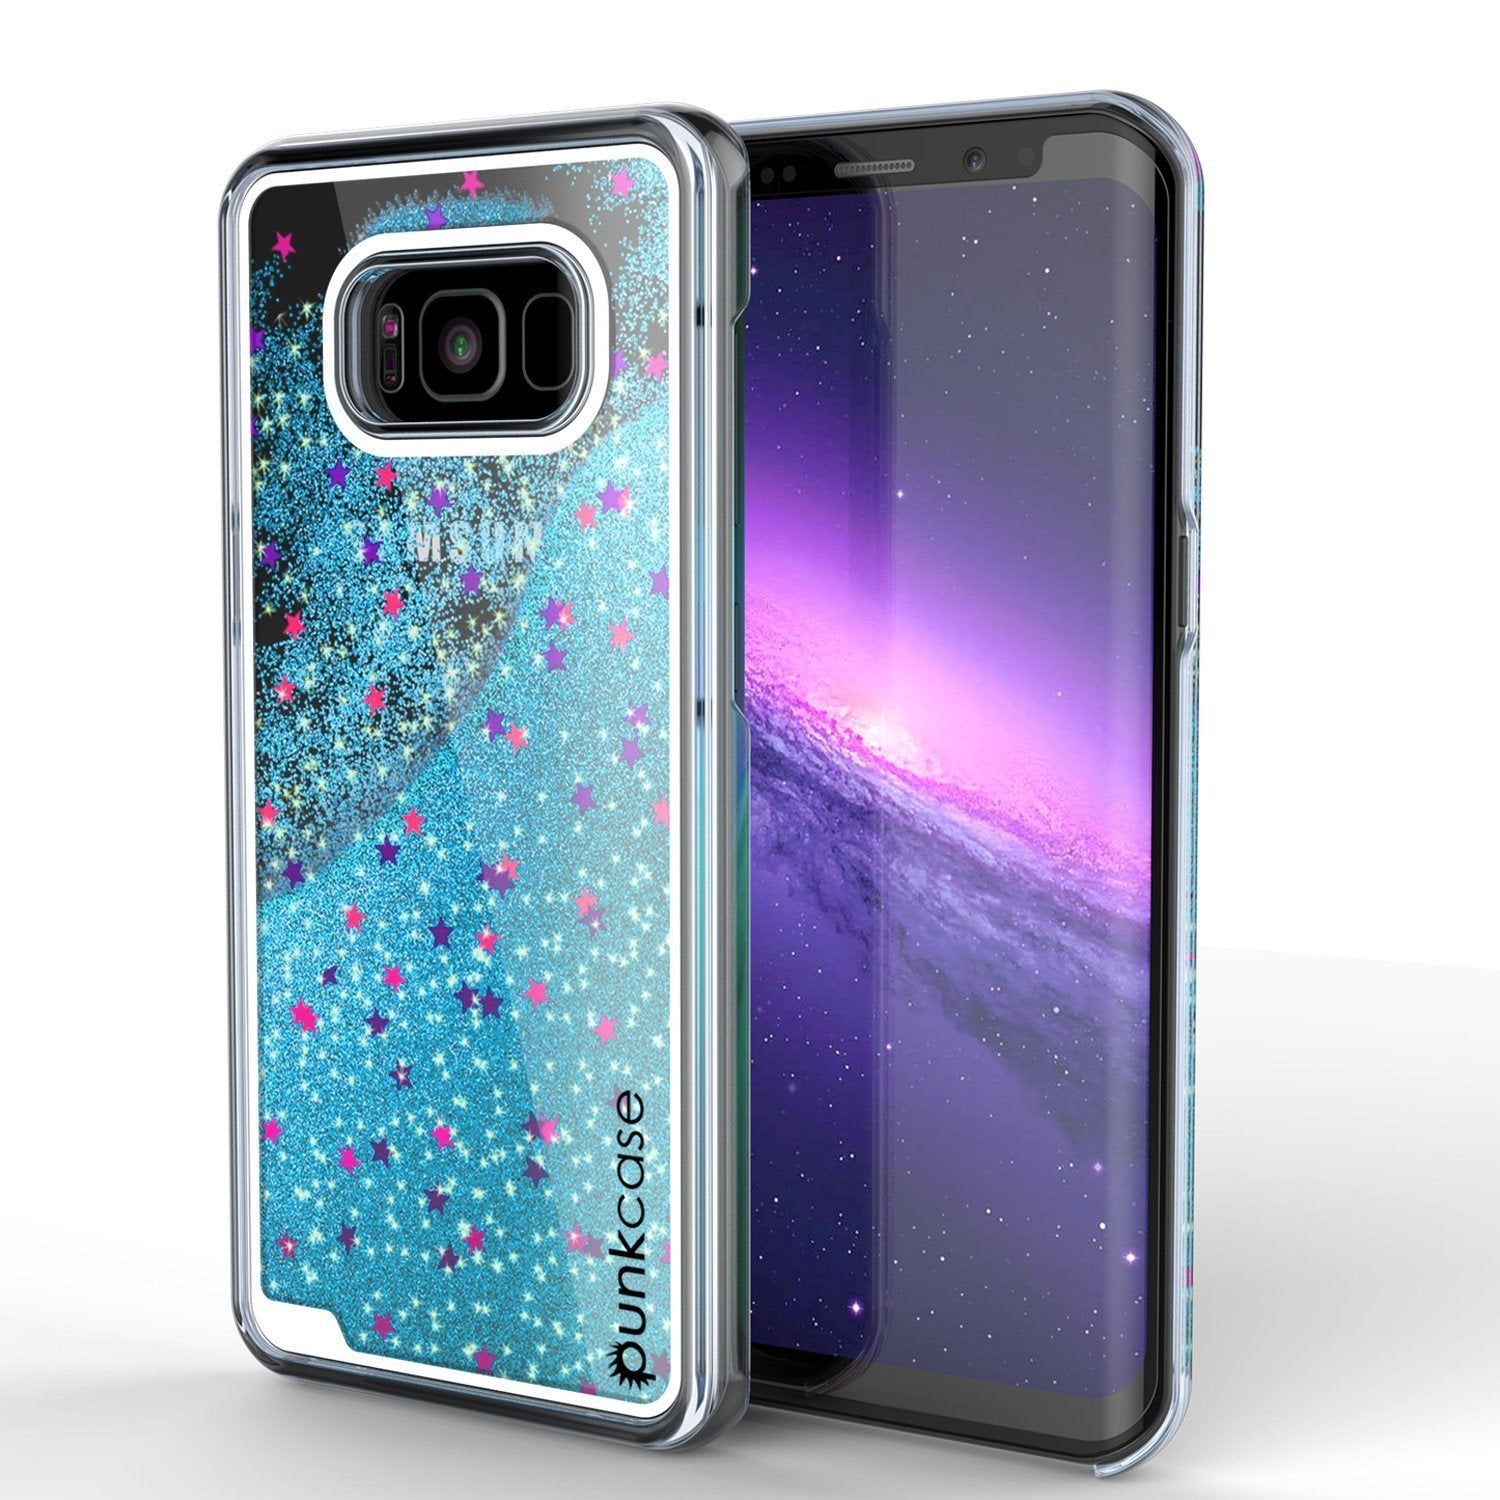 S8 Plus Punkcase, Liquid Teal Series Protective Dual Layer Cover